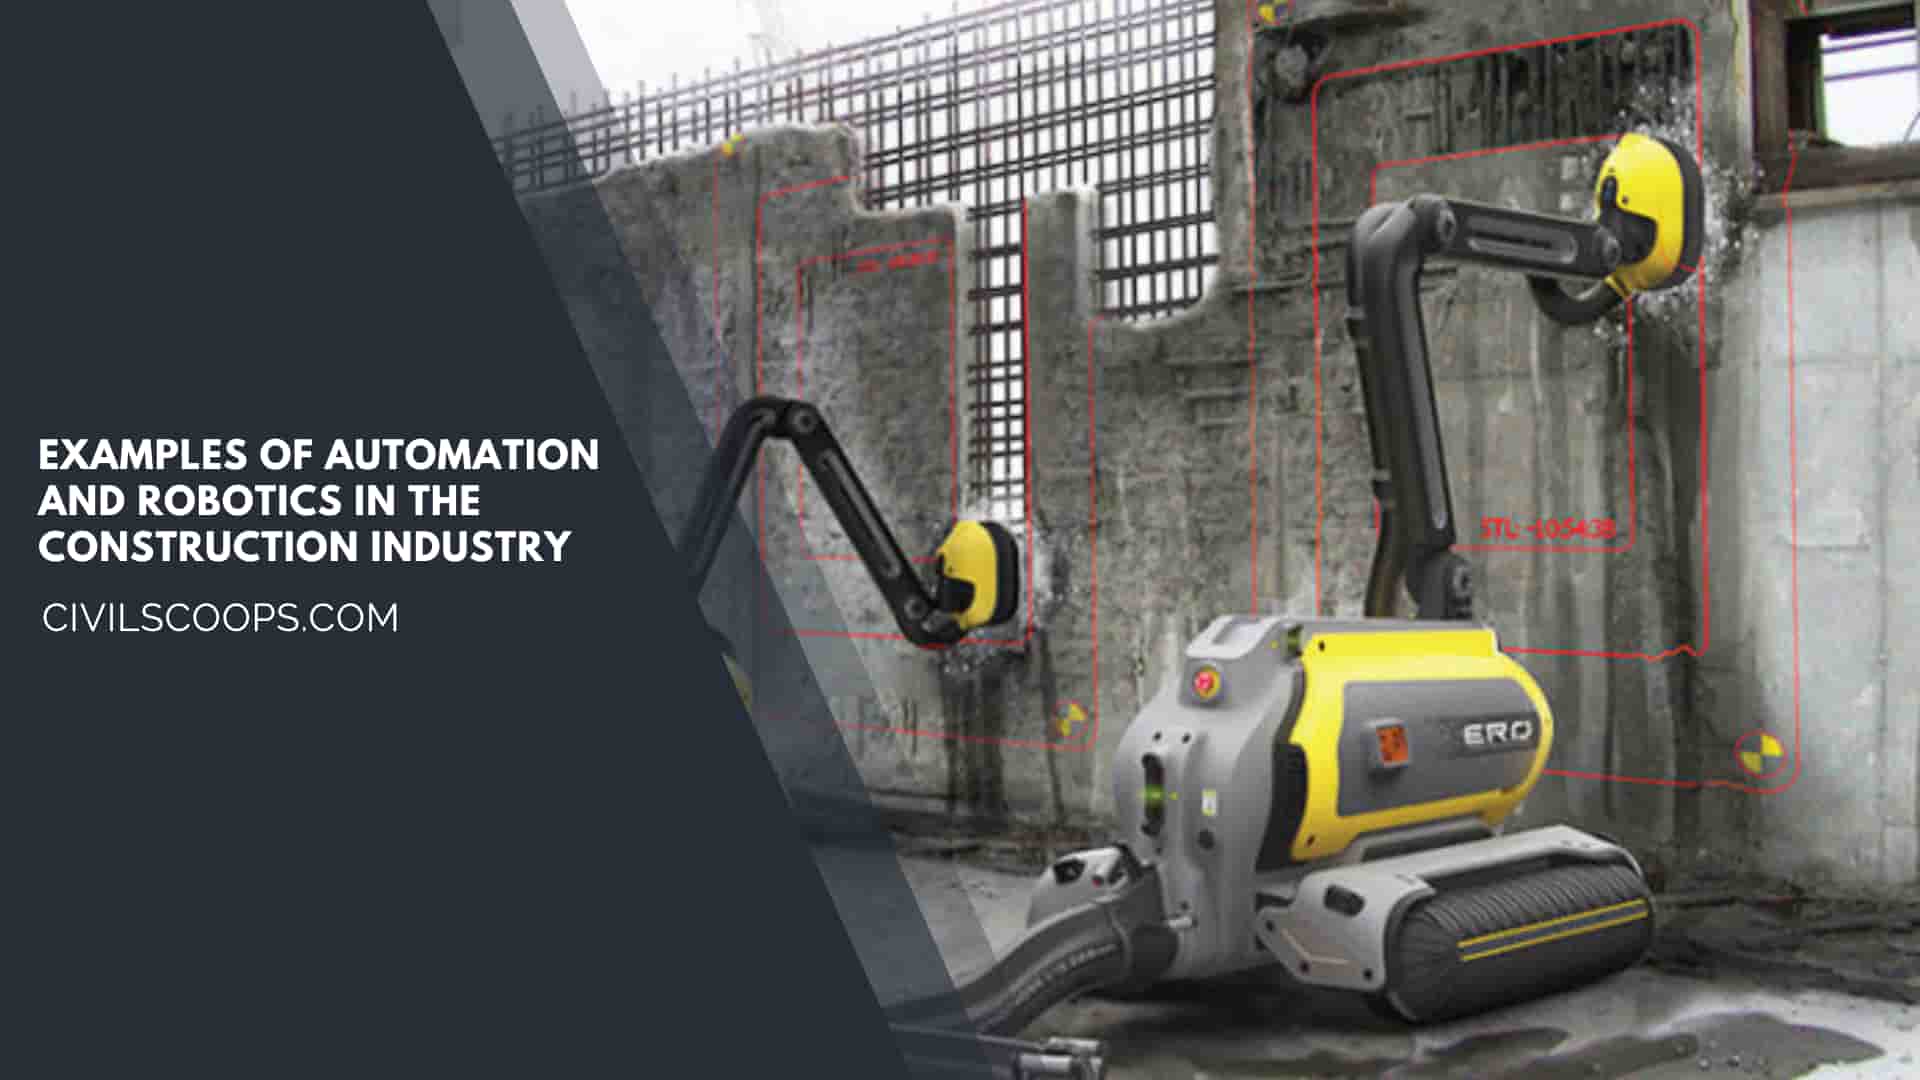 Examples of Automation and Robotics in the Construction Industry